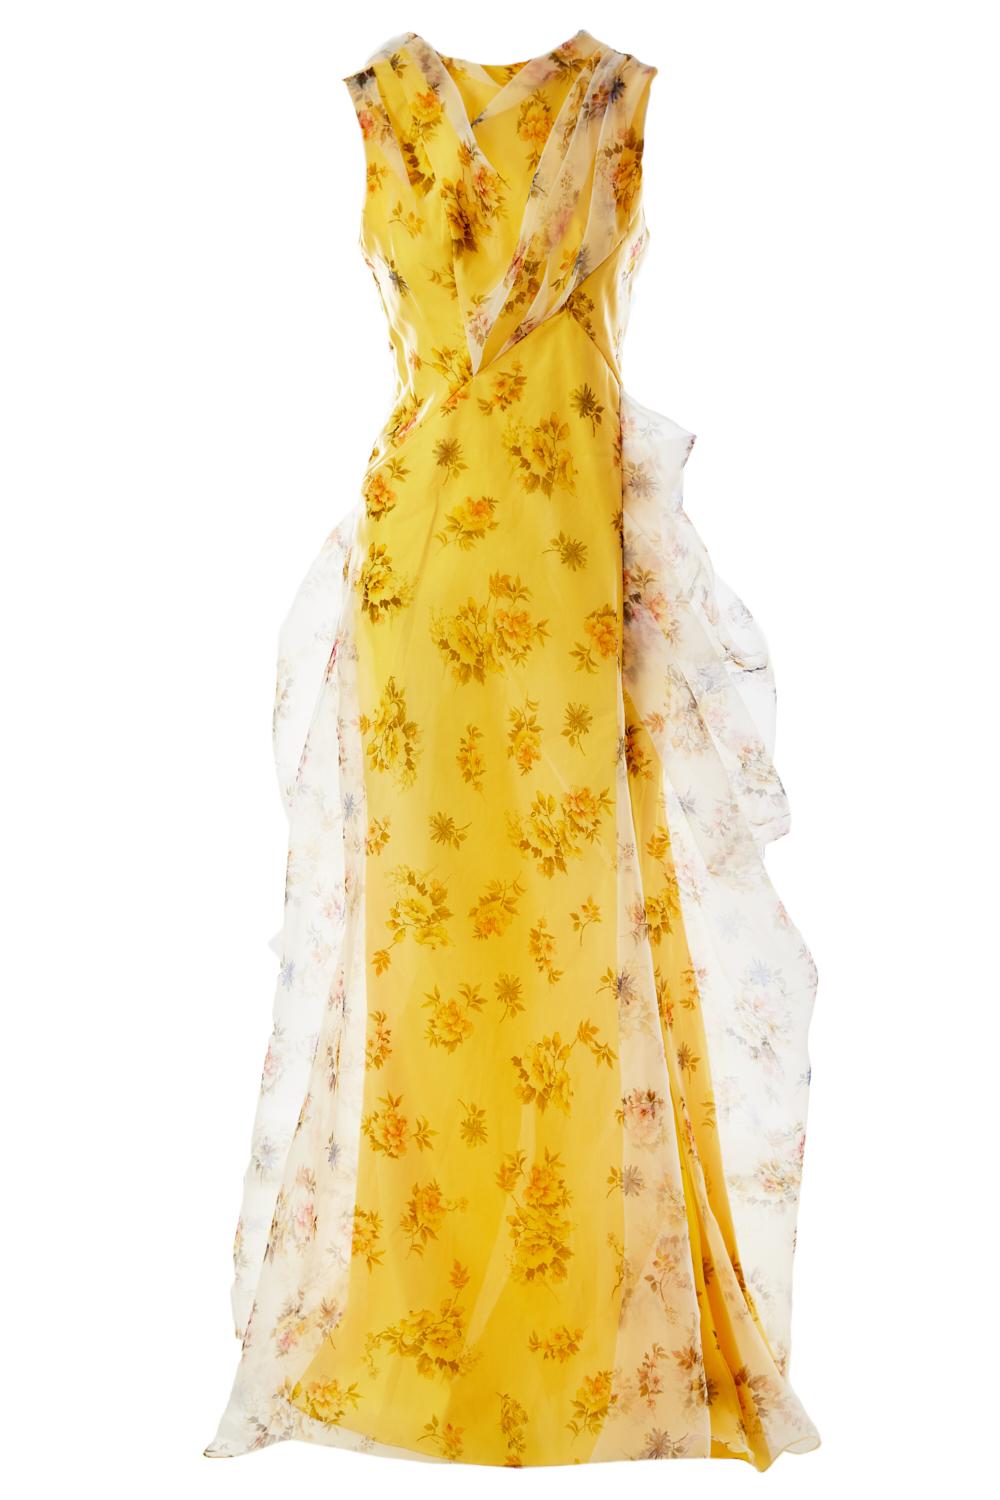 DELICATE YELLOW FLORAL DRESS